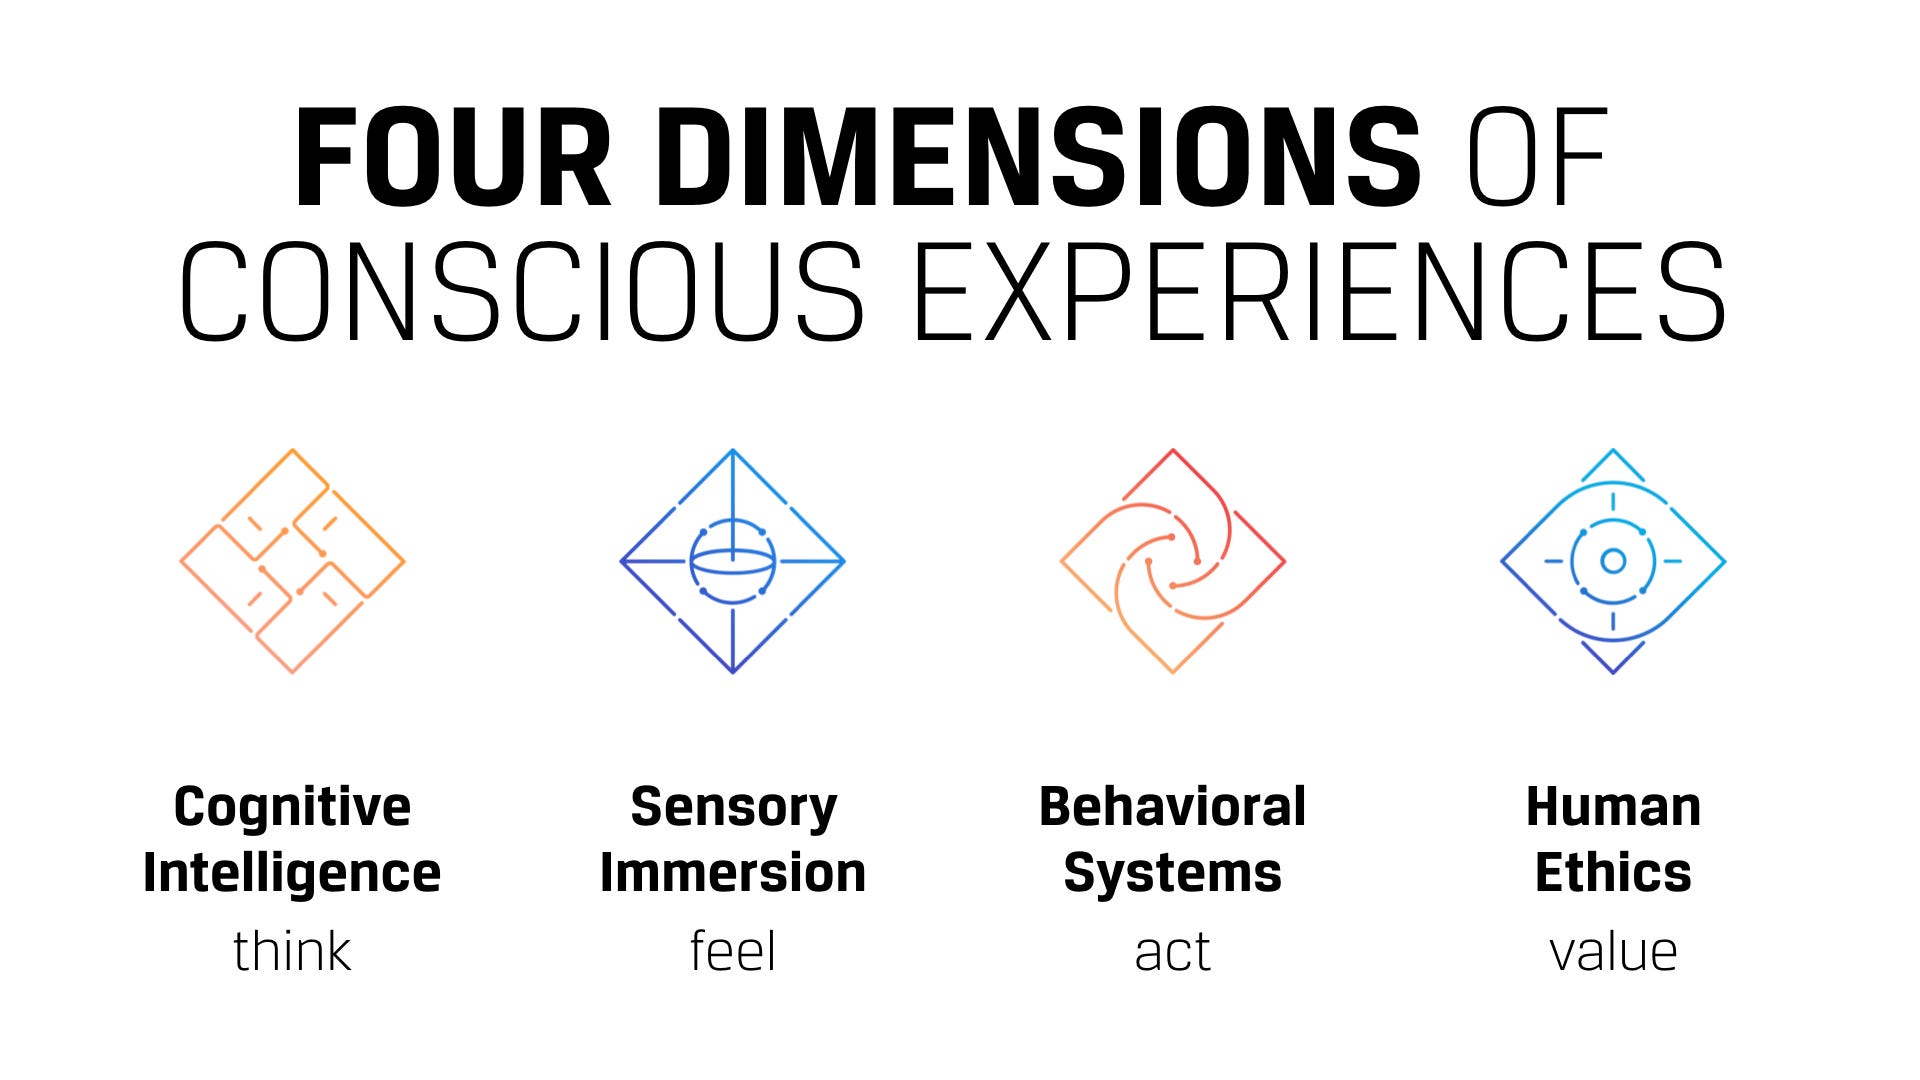 Four Dimensions of Conscious Experiences: Cognitive Intelligence, Sensory Immersion, Behavioral Systems, Human Ethics